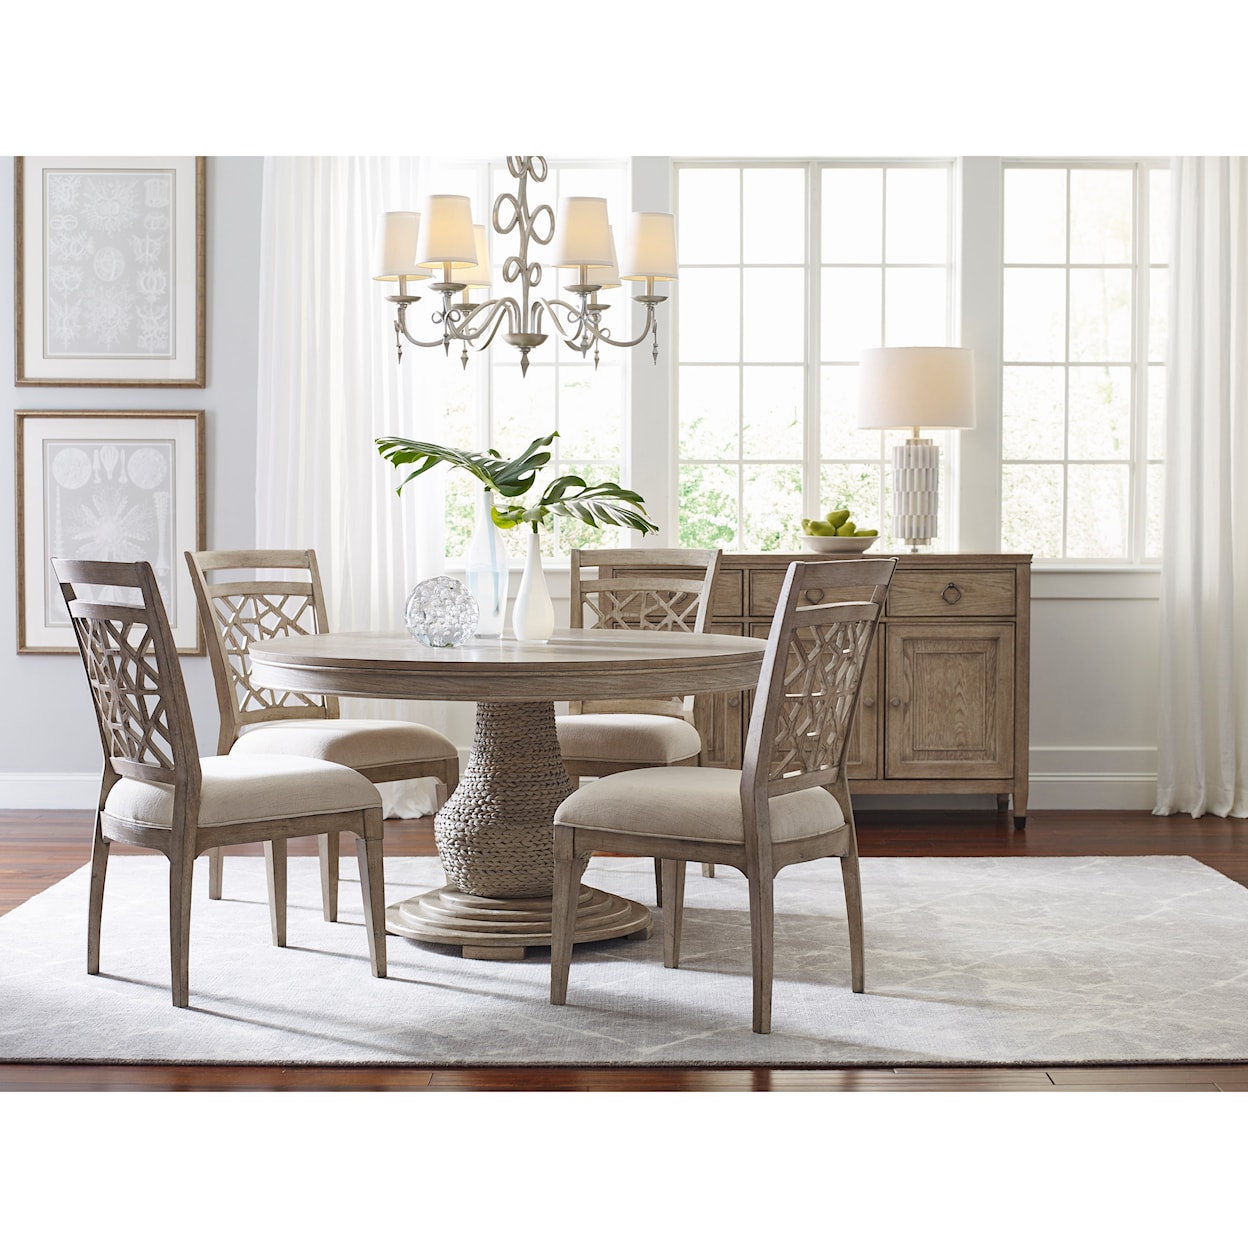 American Drew Vista Casual Dining Room Group